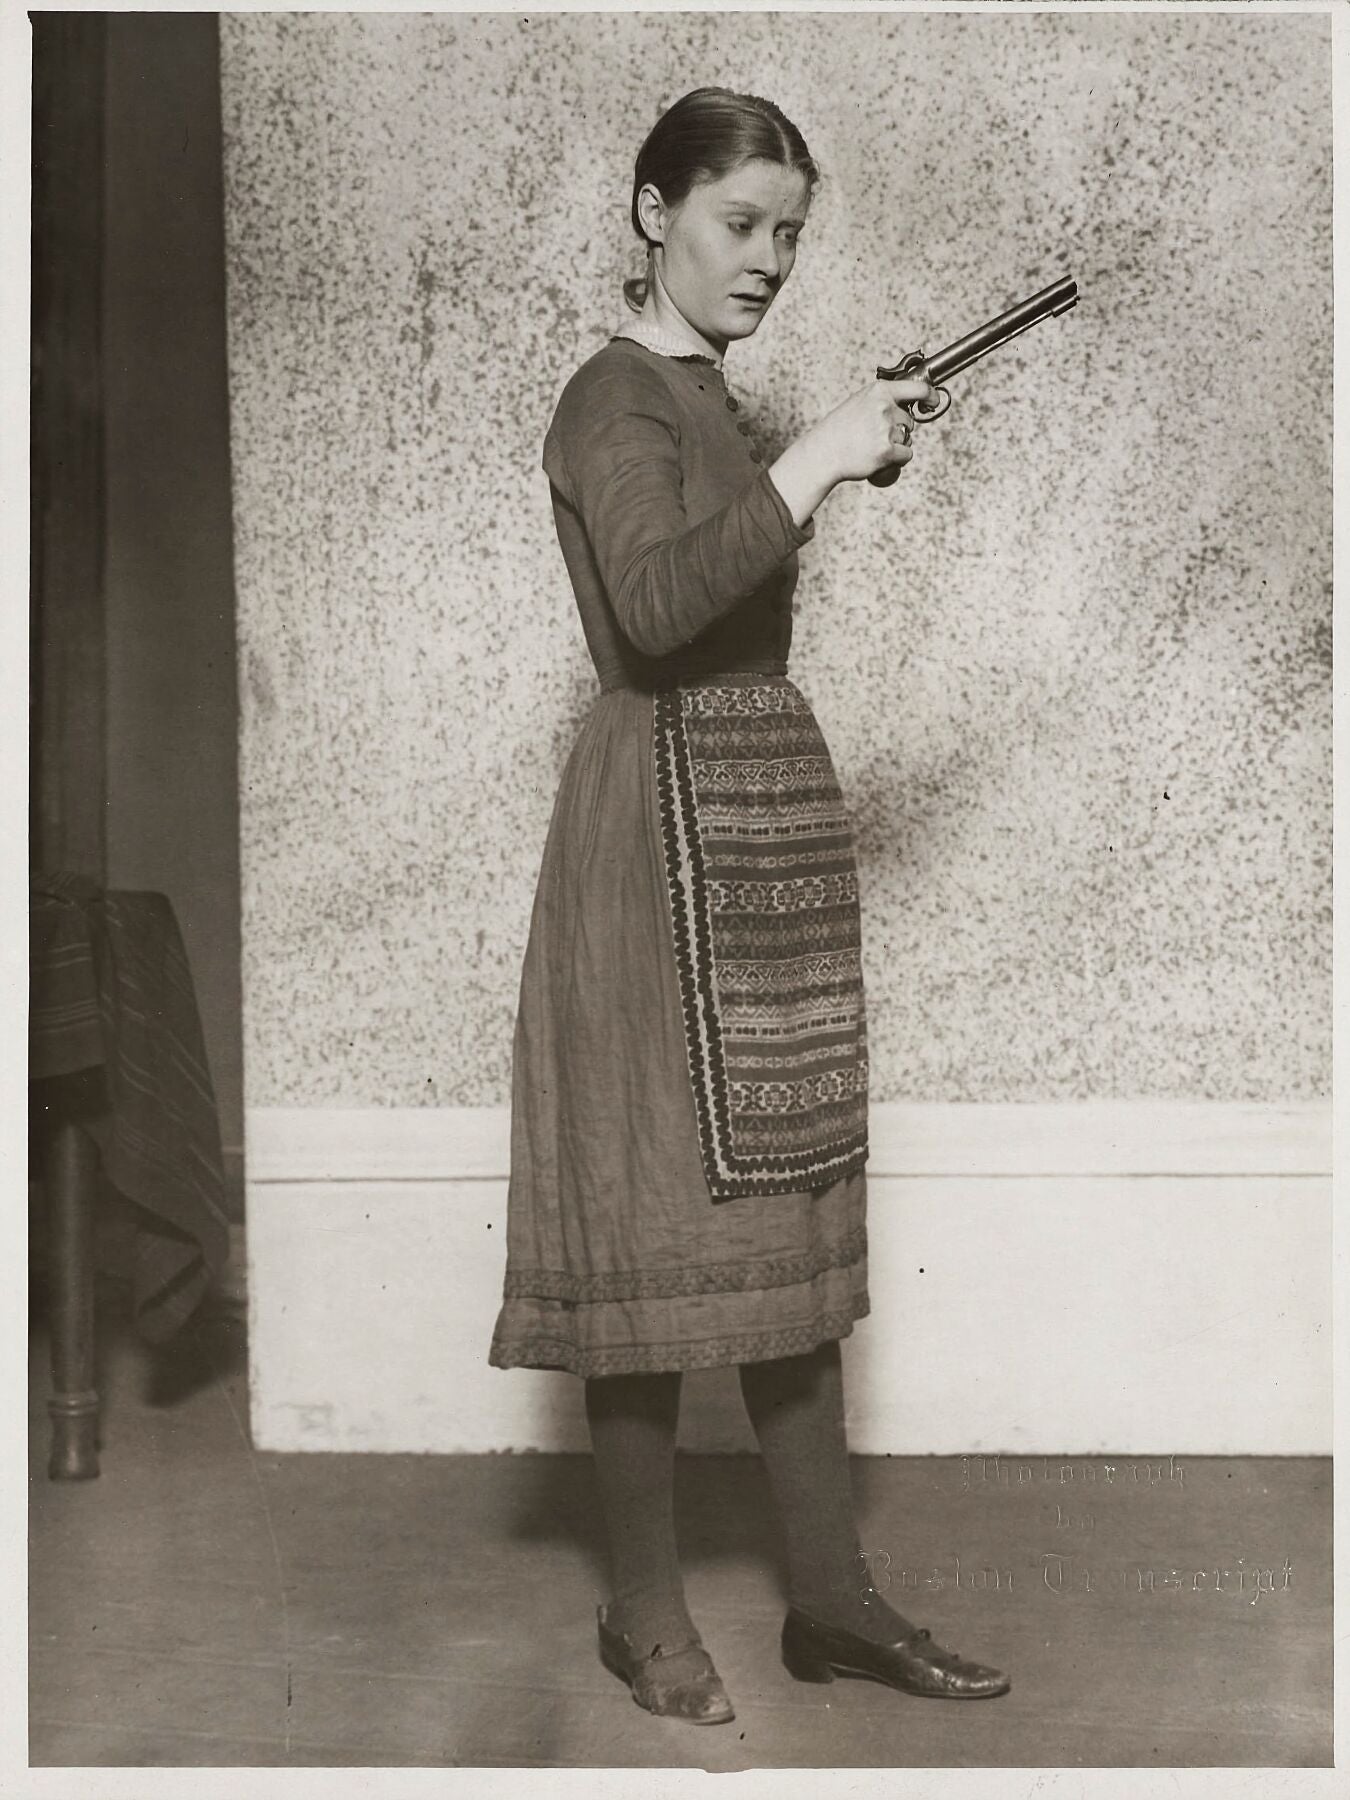 Peg Entwistle, posing in costume for a scene in Wild Duck. Circa 1925. Theatrical Portrait Photographs, TCS 28, Harvard Theatre Collection, Houghton Library, Harvard University